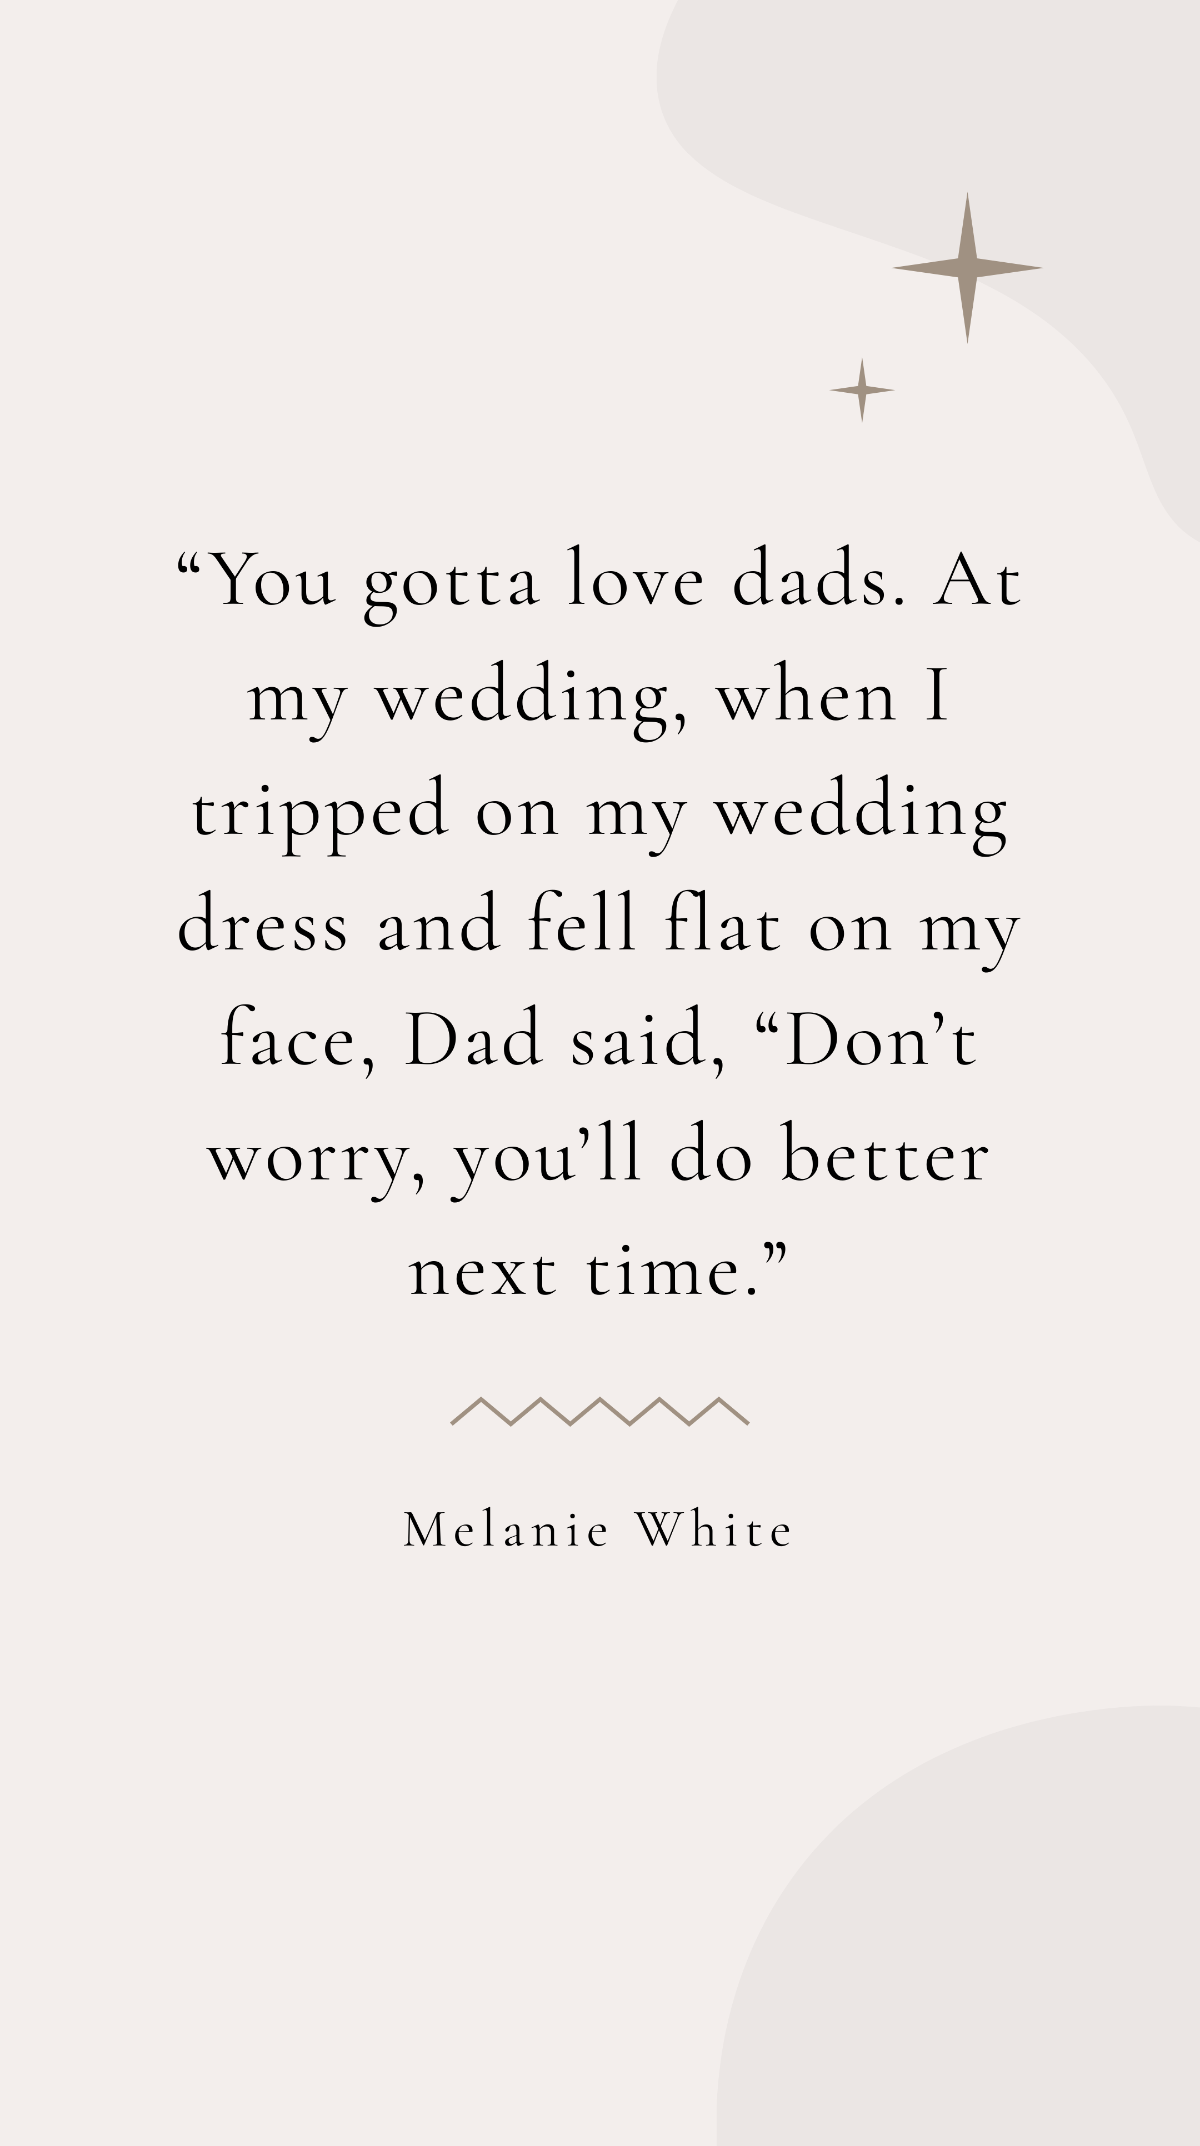 Melanie White - “You gotta love dads. At my wedding, when I tripped on my wedding dress and fell flat on my face, Dad said, “Don’t worry, you’ll do better next time.” Template